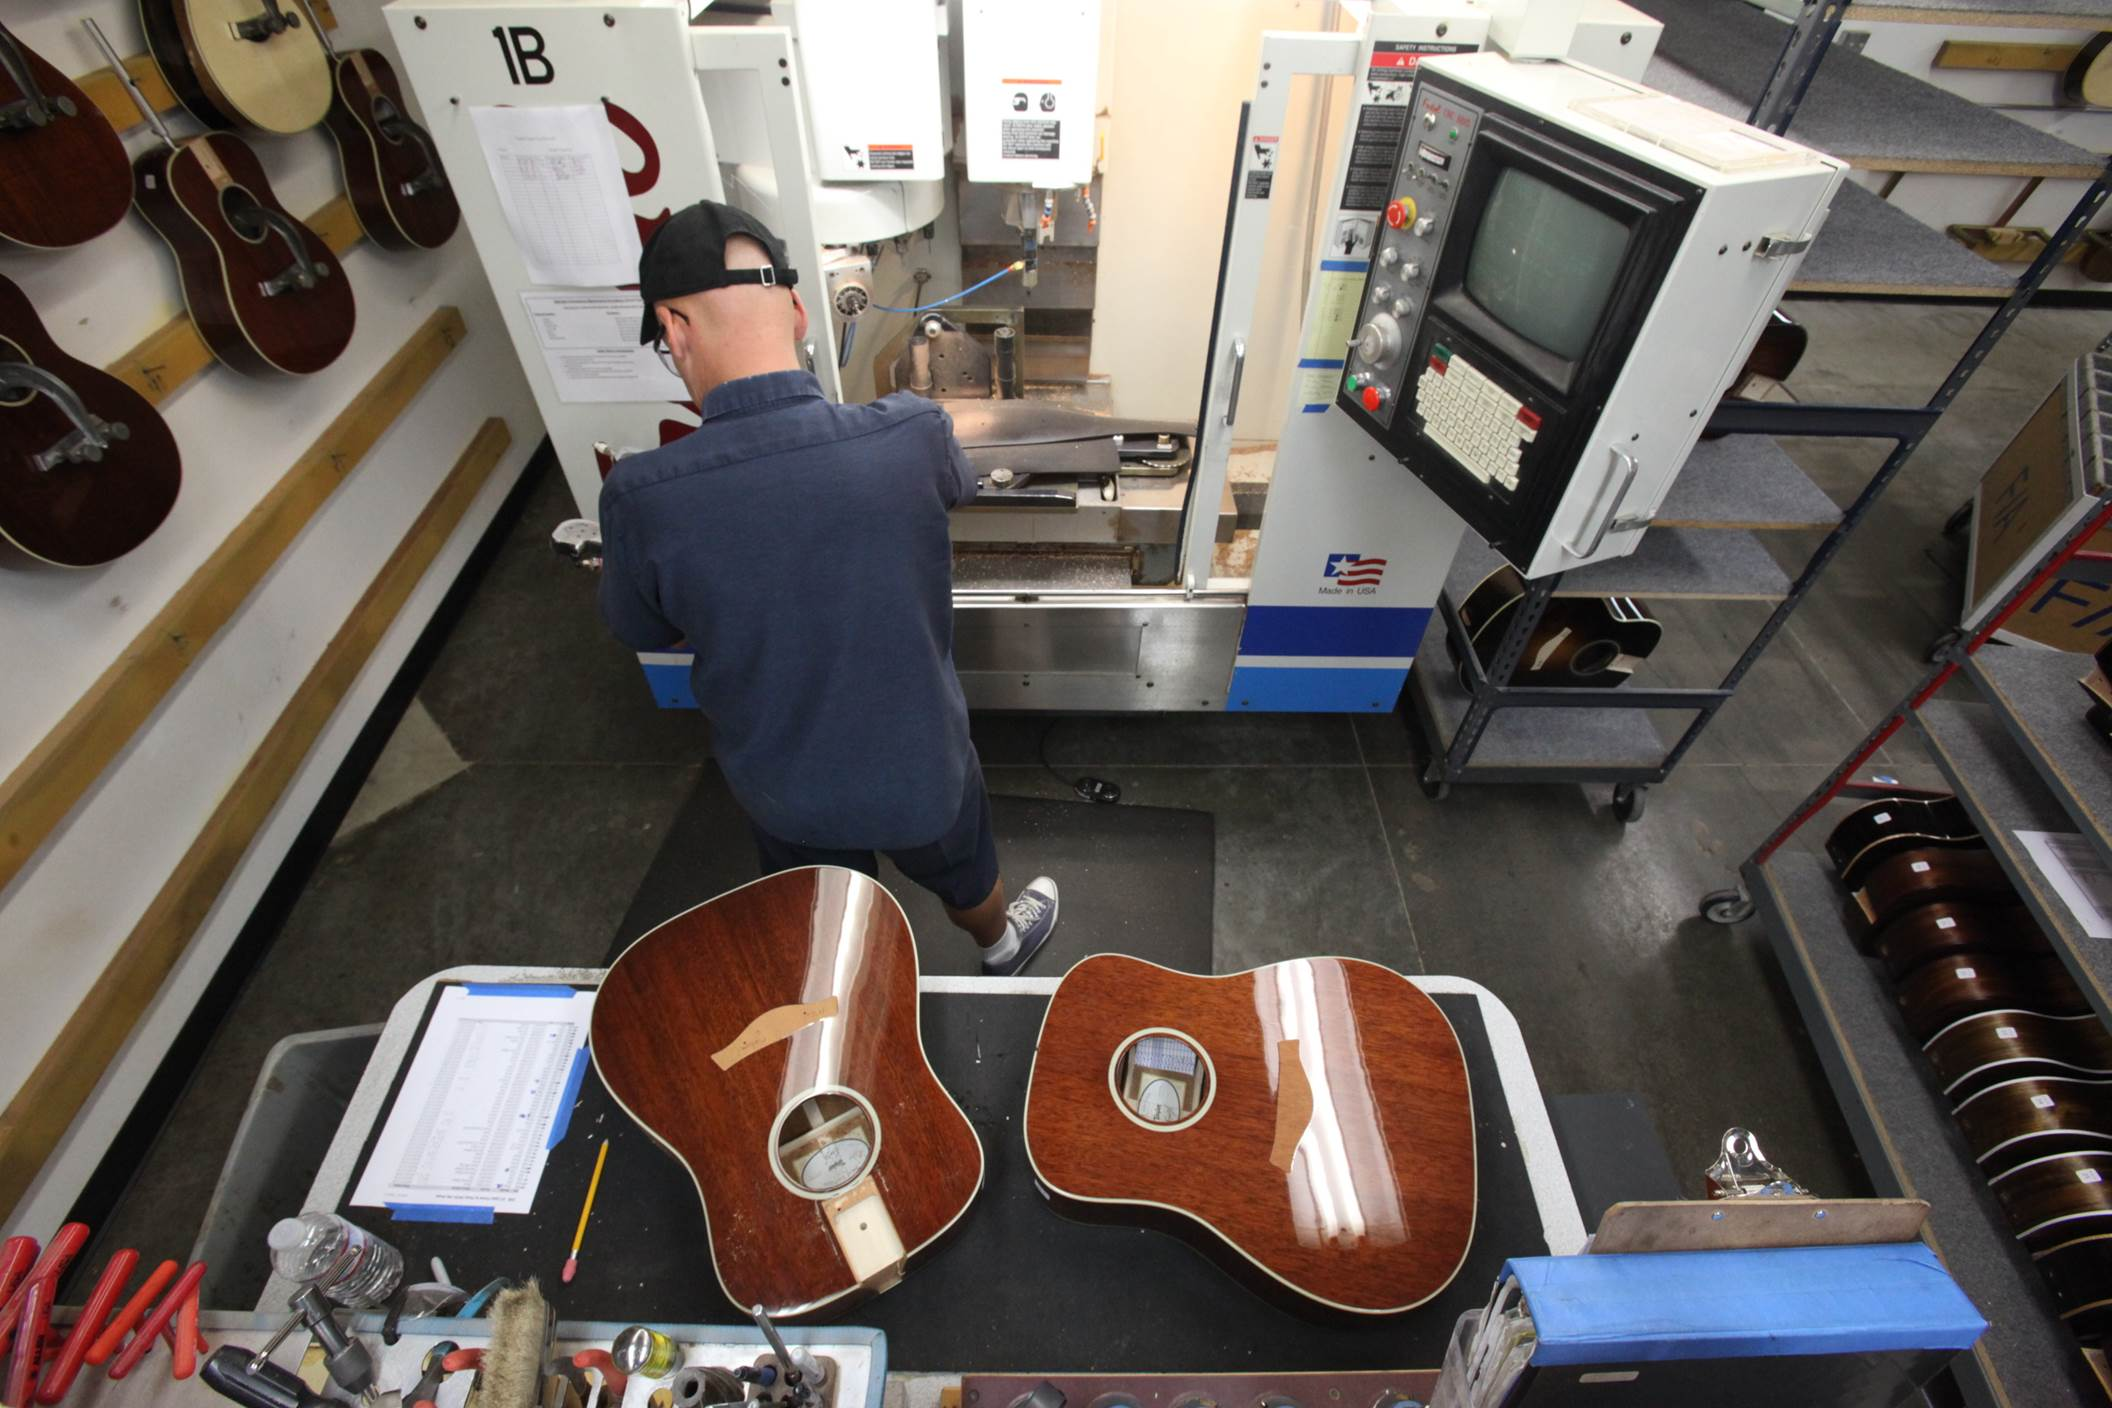 Taylor Guitars uses a Haas Vertical Machining Center to carve the wood for its guitars.